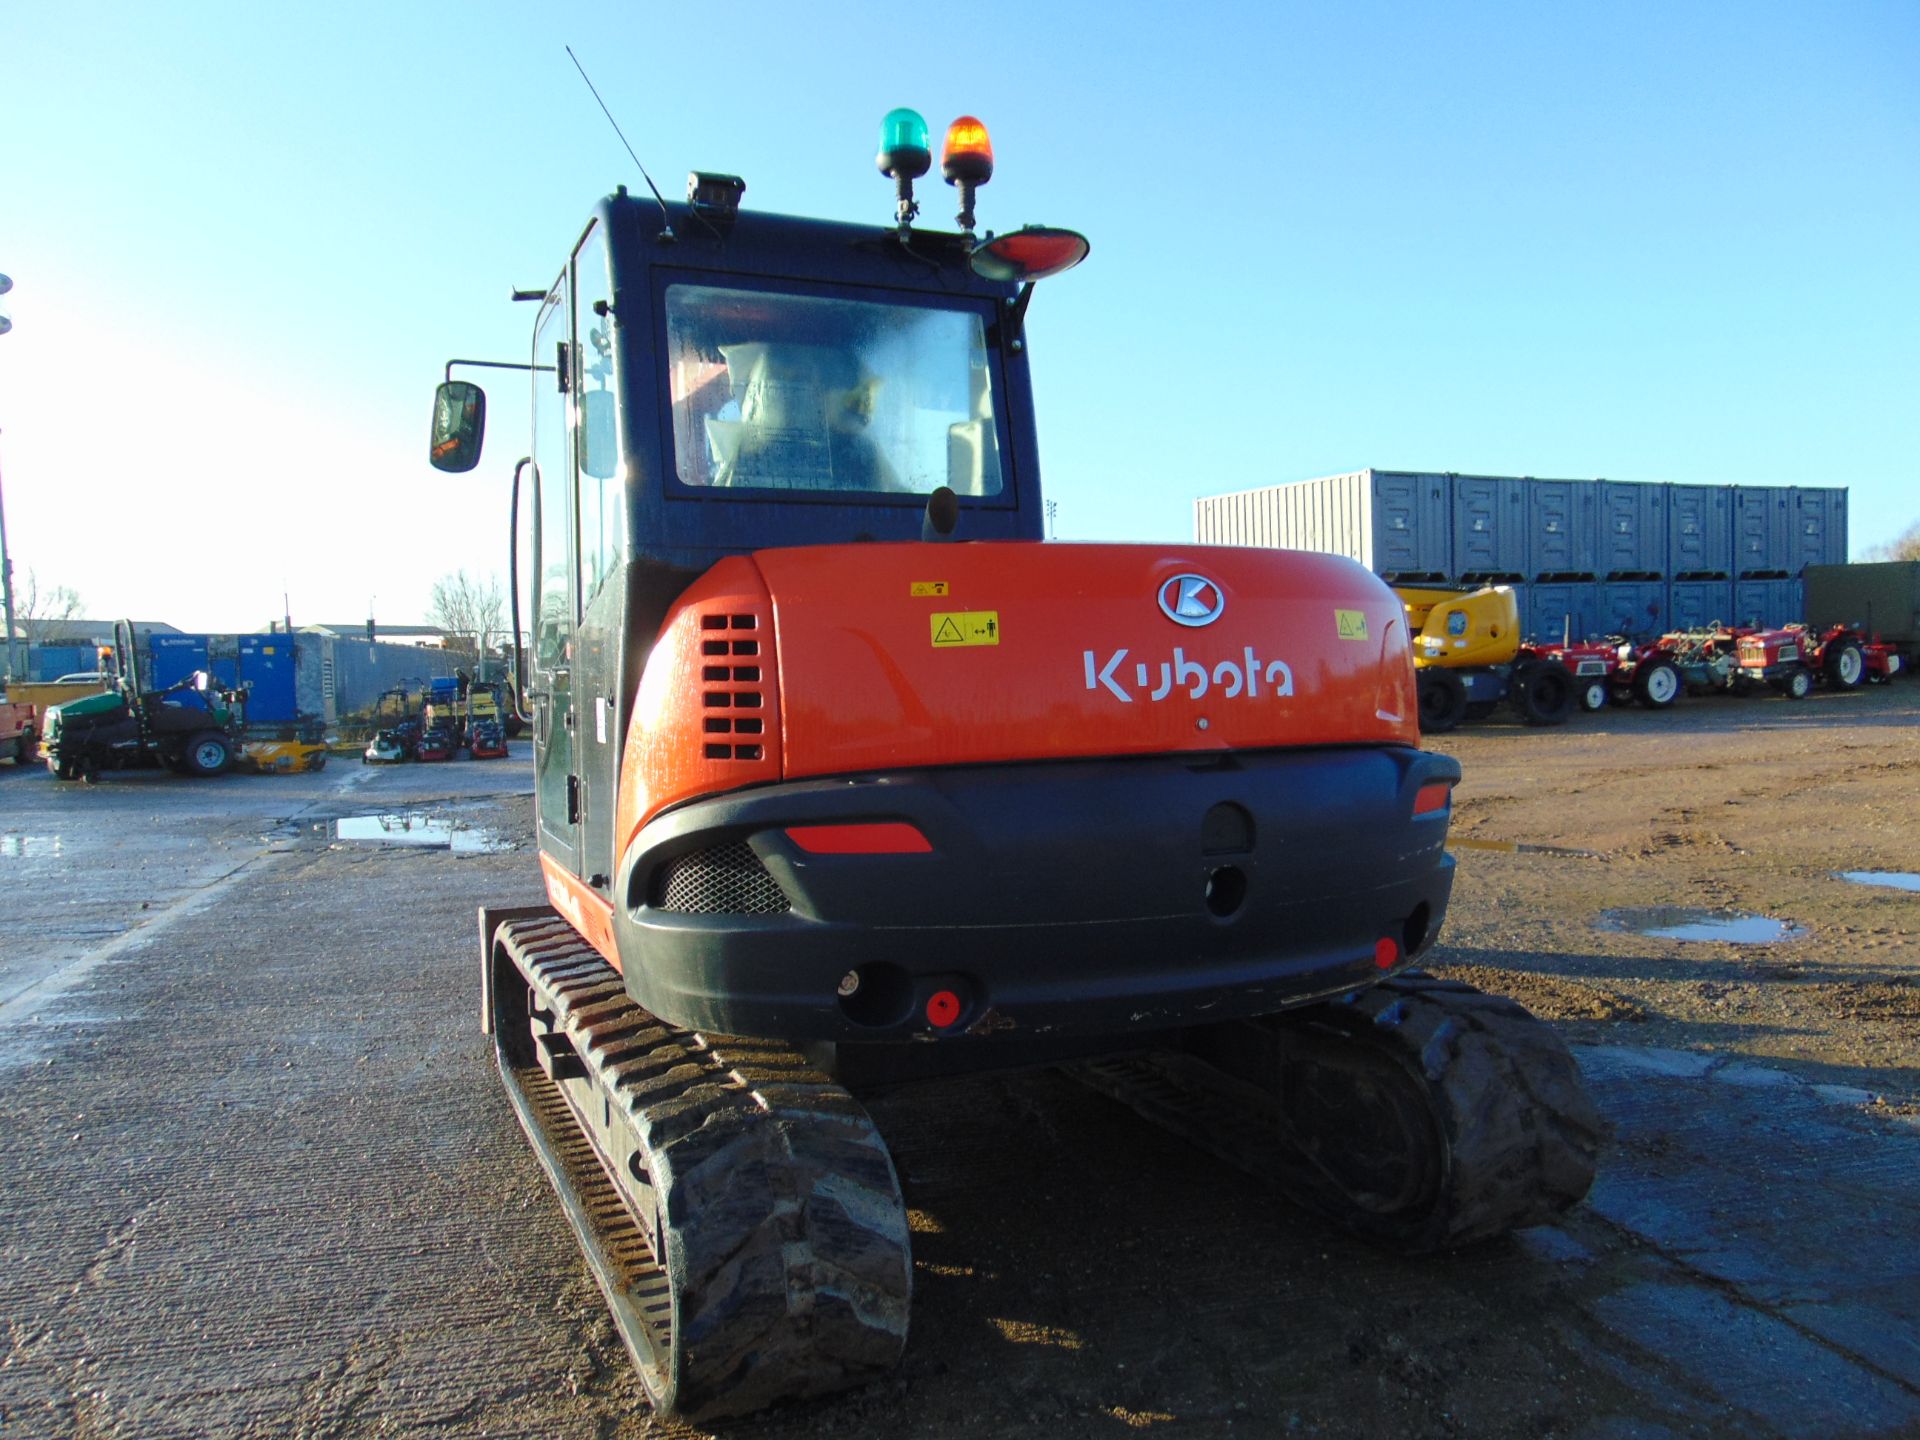 2017 KUBOTA KX 080-4A Excavator 1212 Hrs Only Very High Specification with 3 Buckets Sno 42470 - Bild 5 aus 25